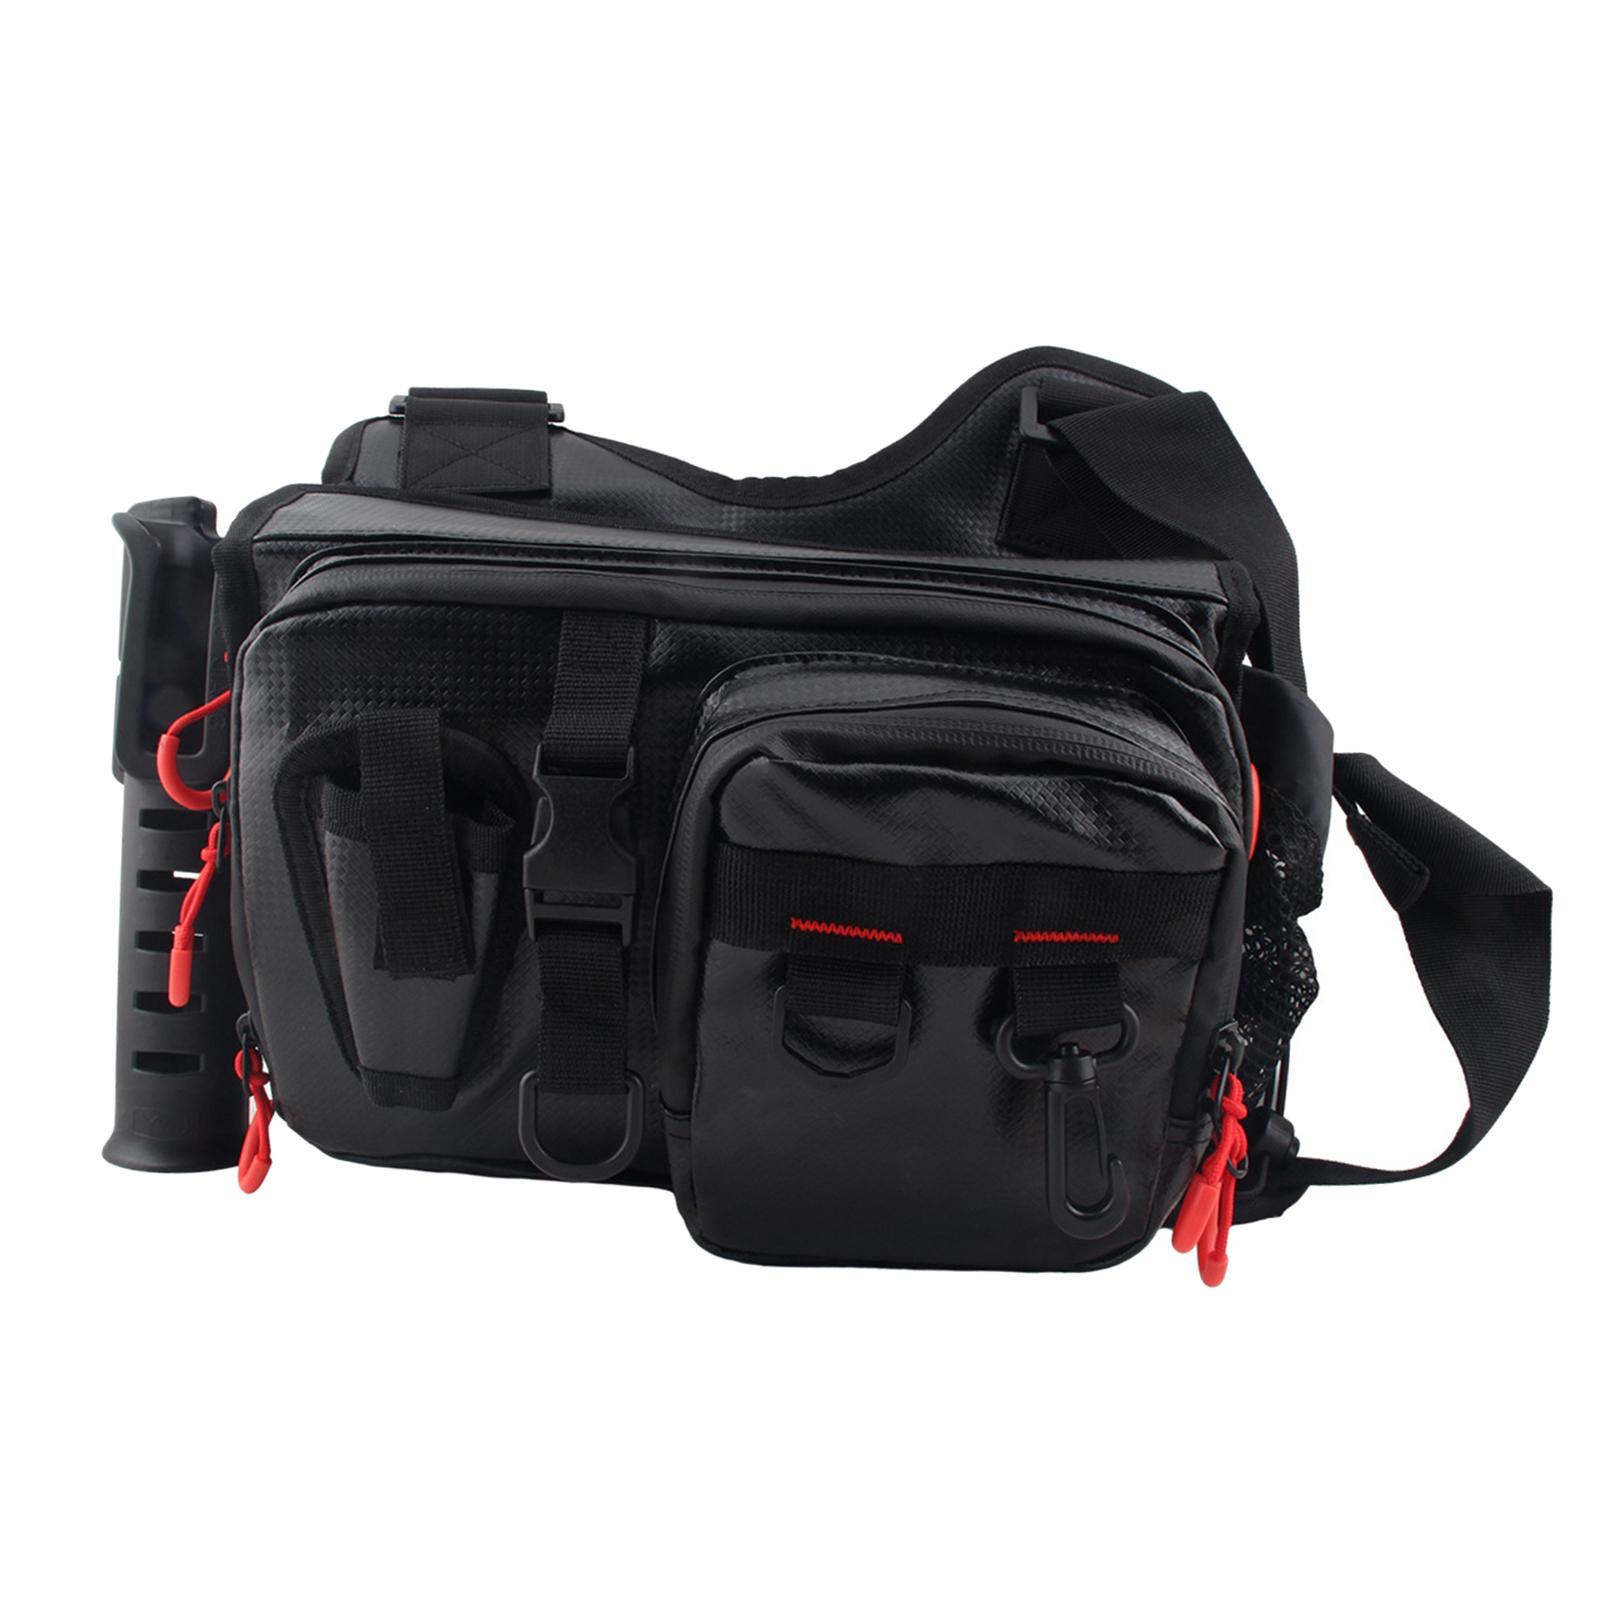 Lure Bag Large Capacity Durable Lure Fishing Bag for Fishing Hiking Outdoor